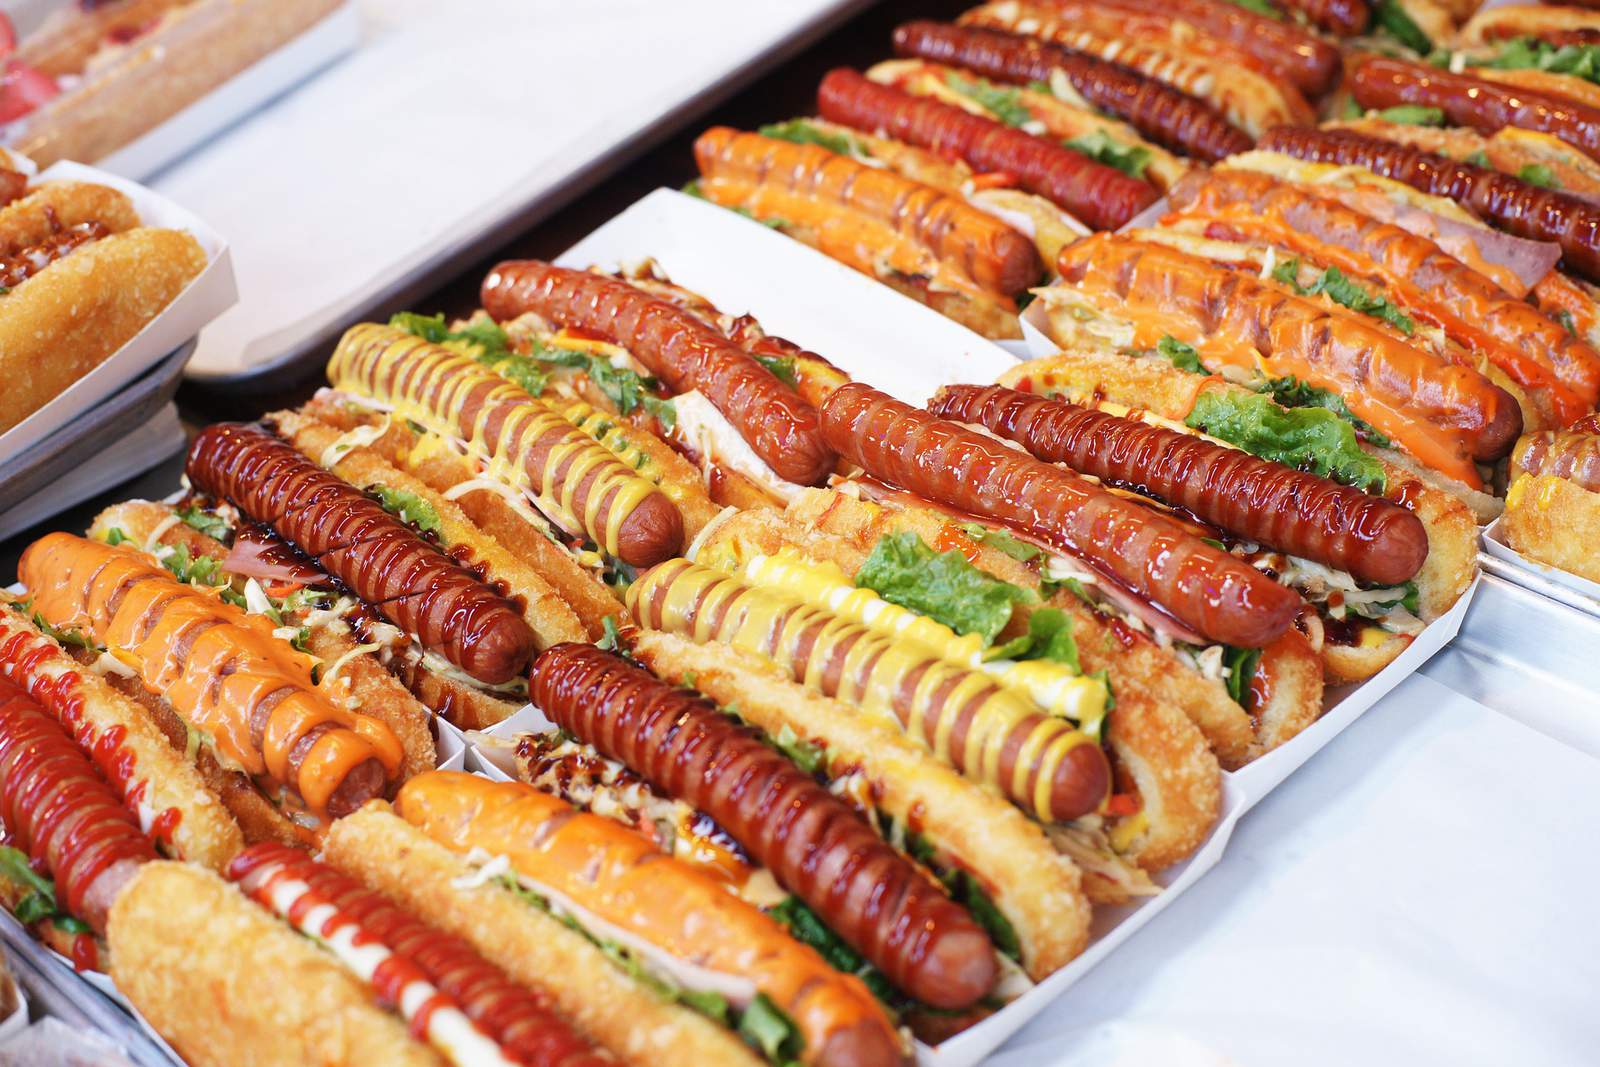 These are the 17 best places to get hot dogs in Houston, according to residents